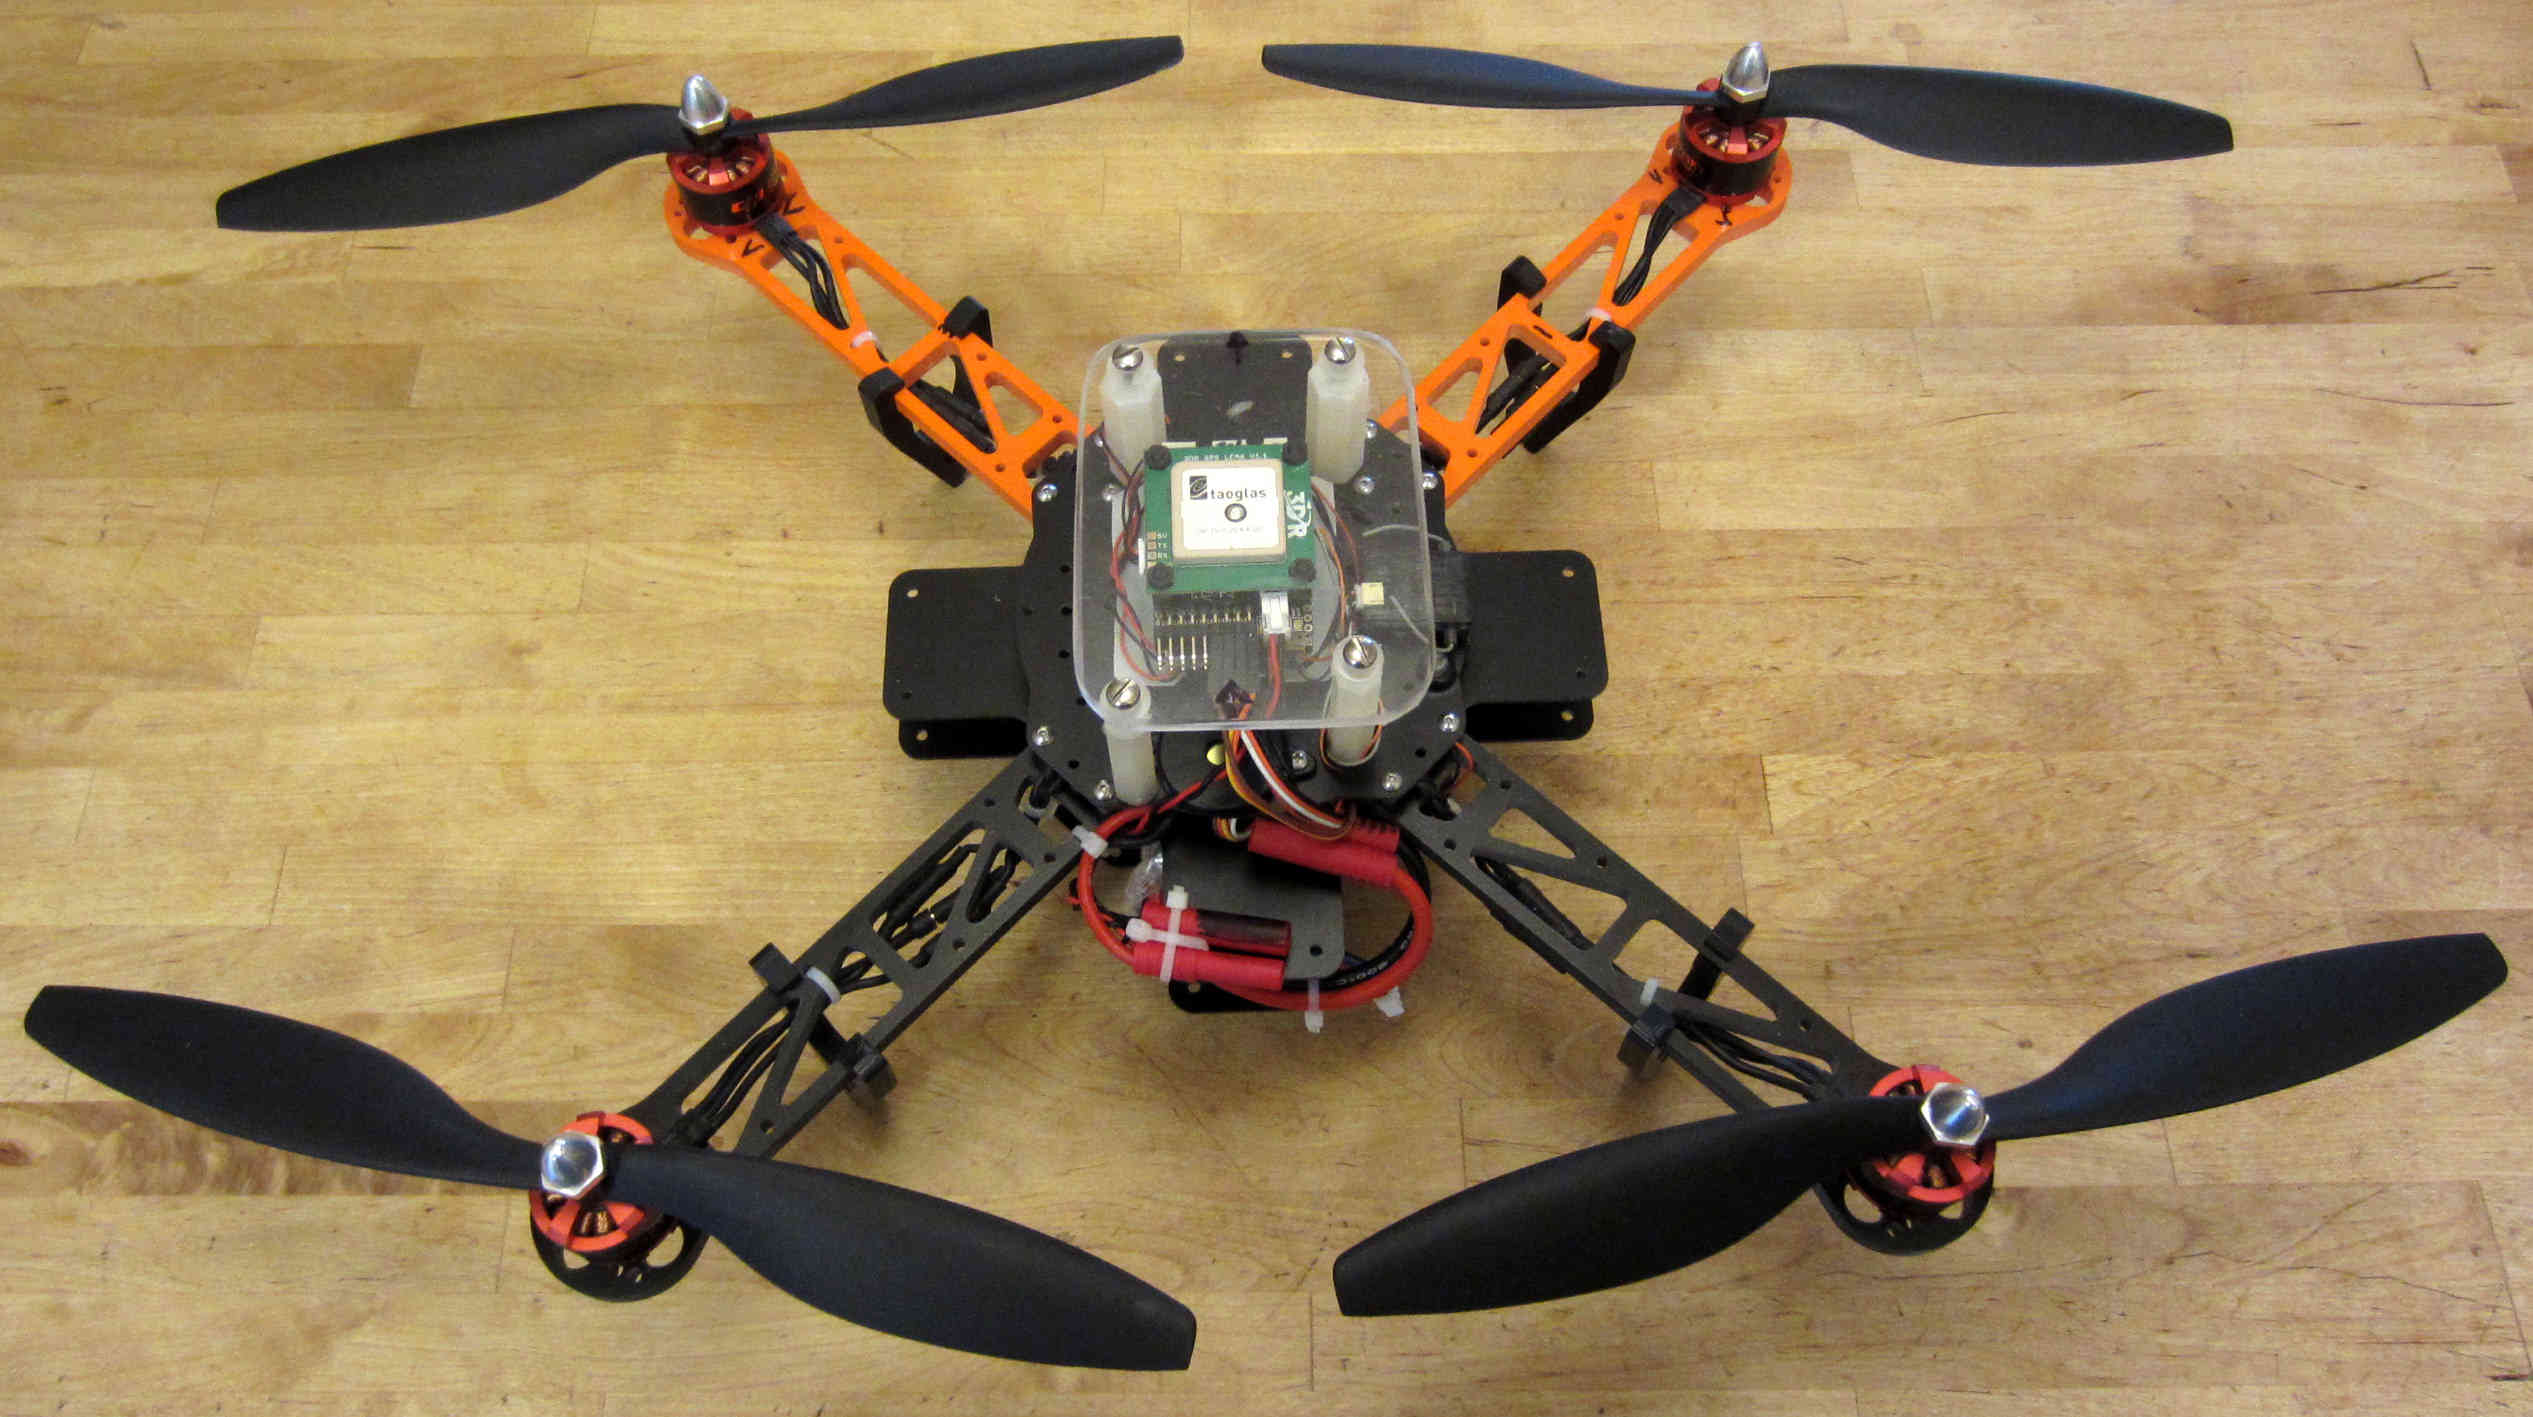 Christian Silver paddle Archived: Build Your Own Multicopter — Copter documentation